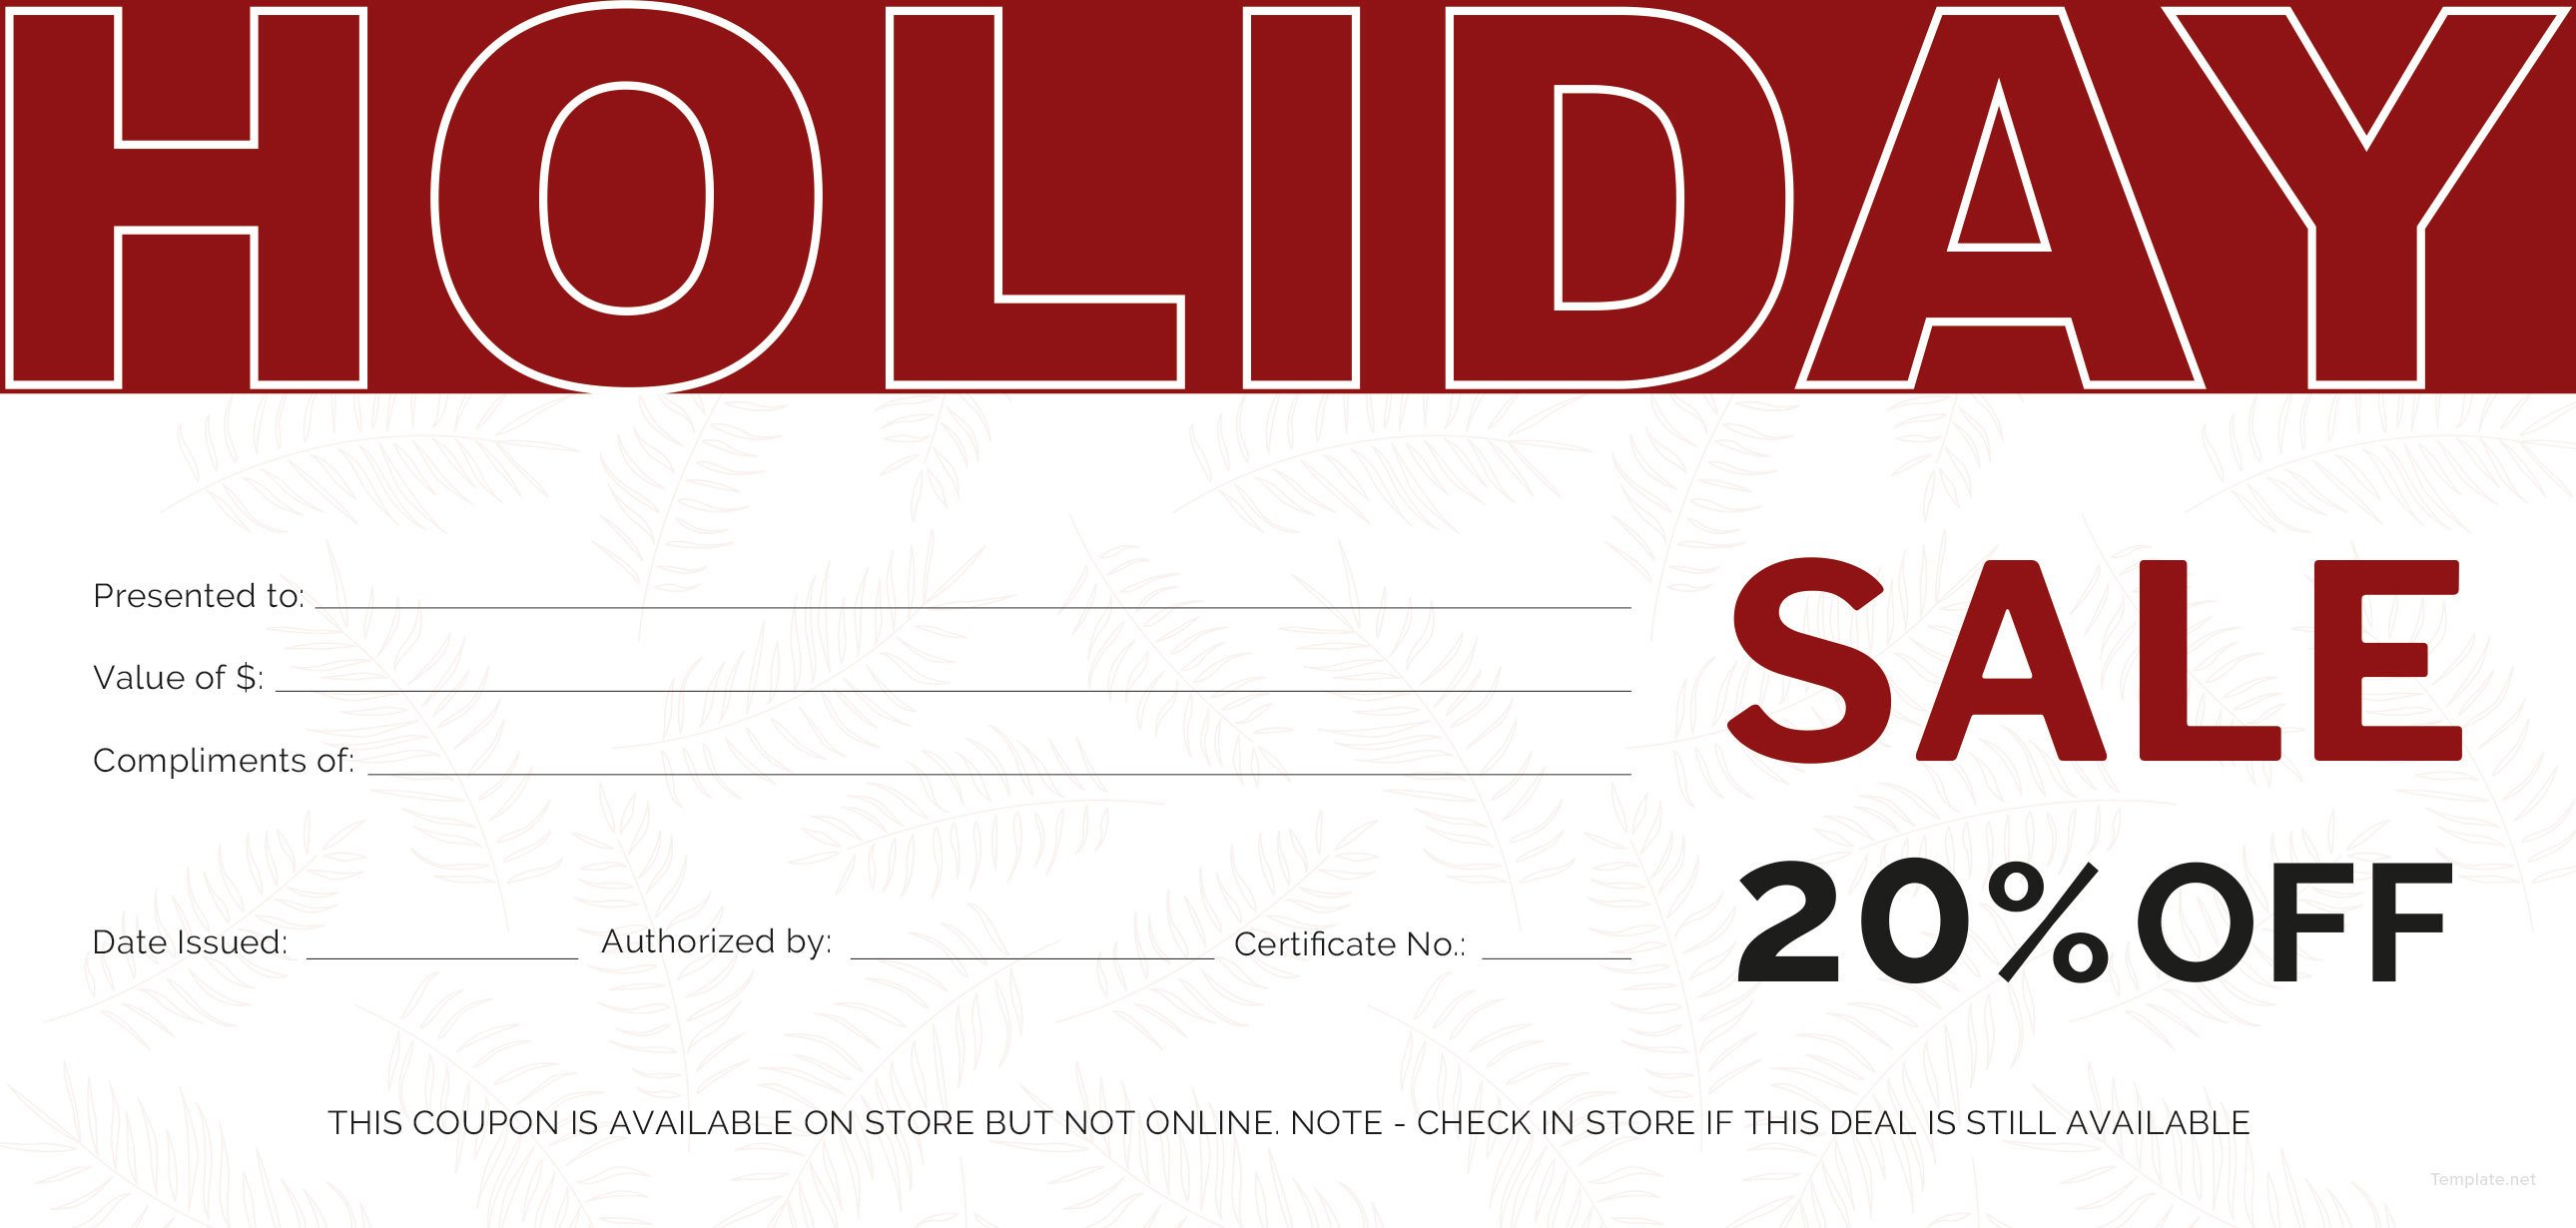 free-holiday-gift-voucher-template-in-adobe-photoshop-illustrator-microsoft-word-publisher